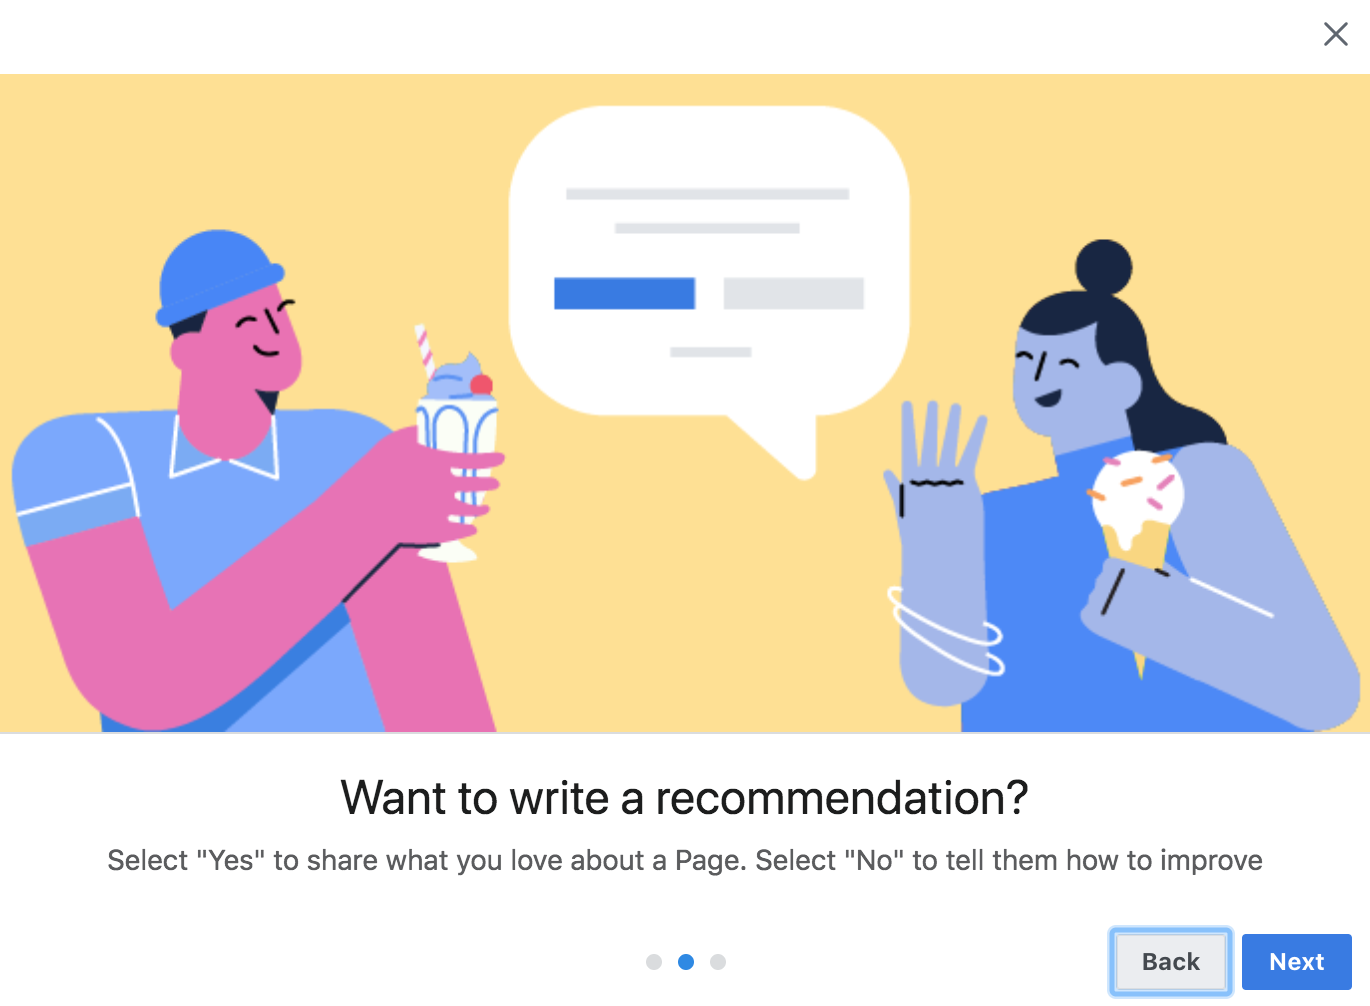 Do you want to write a recommendation